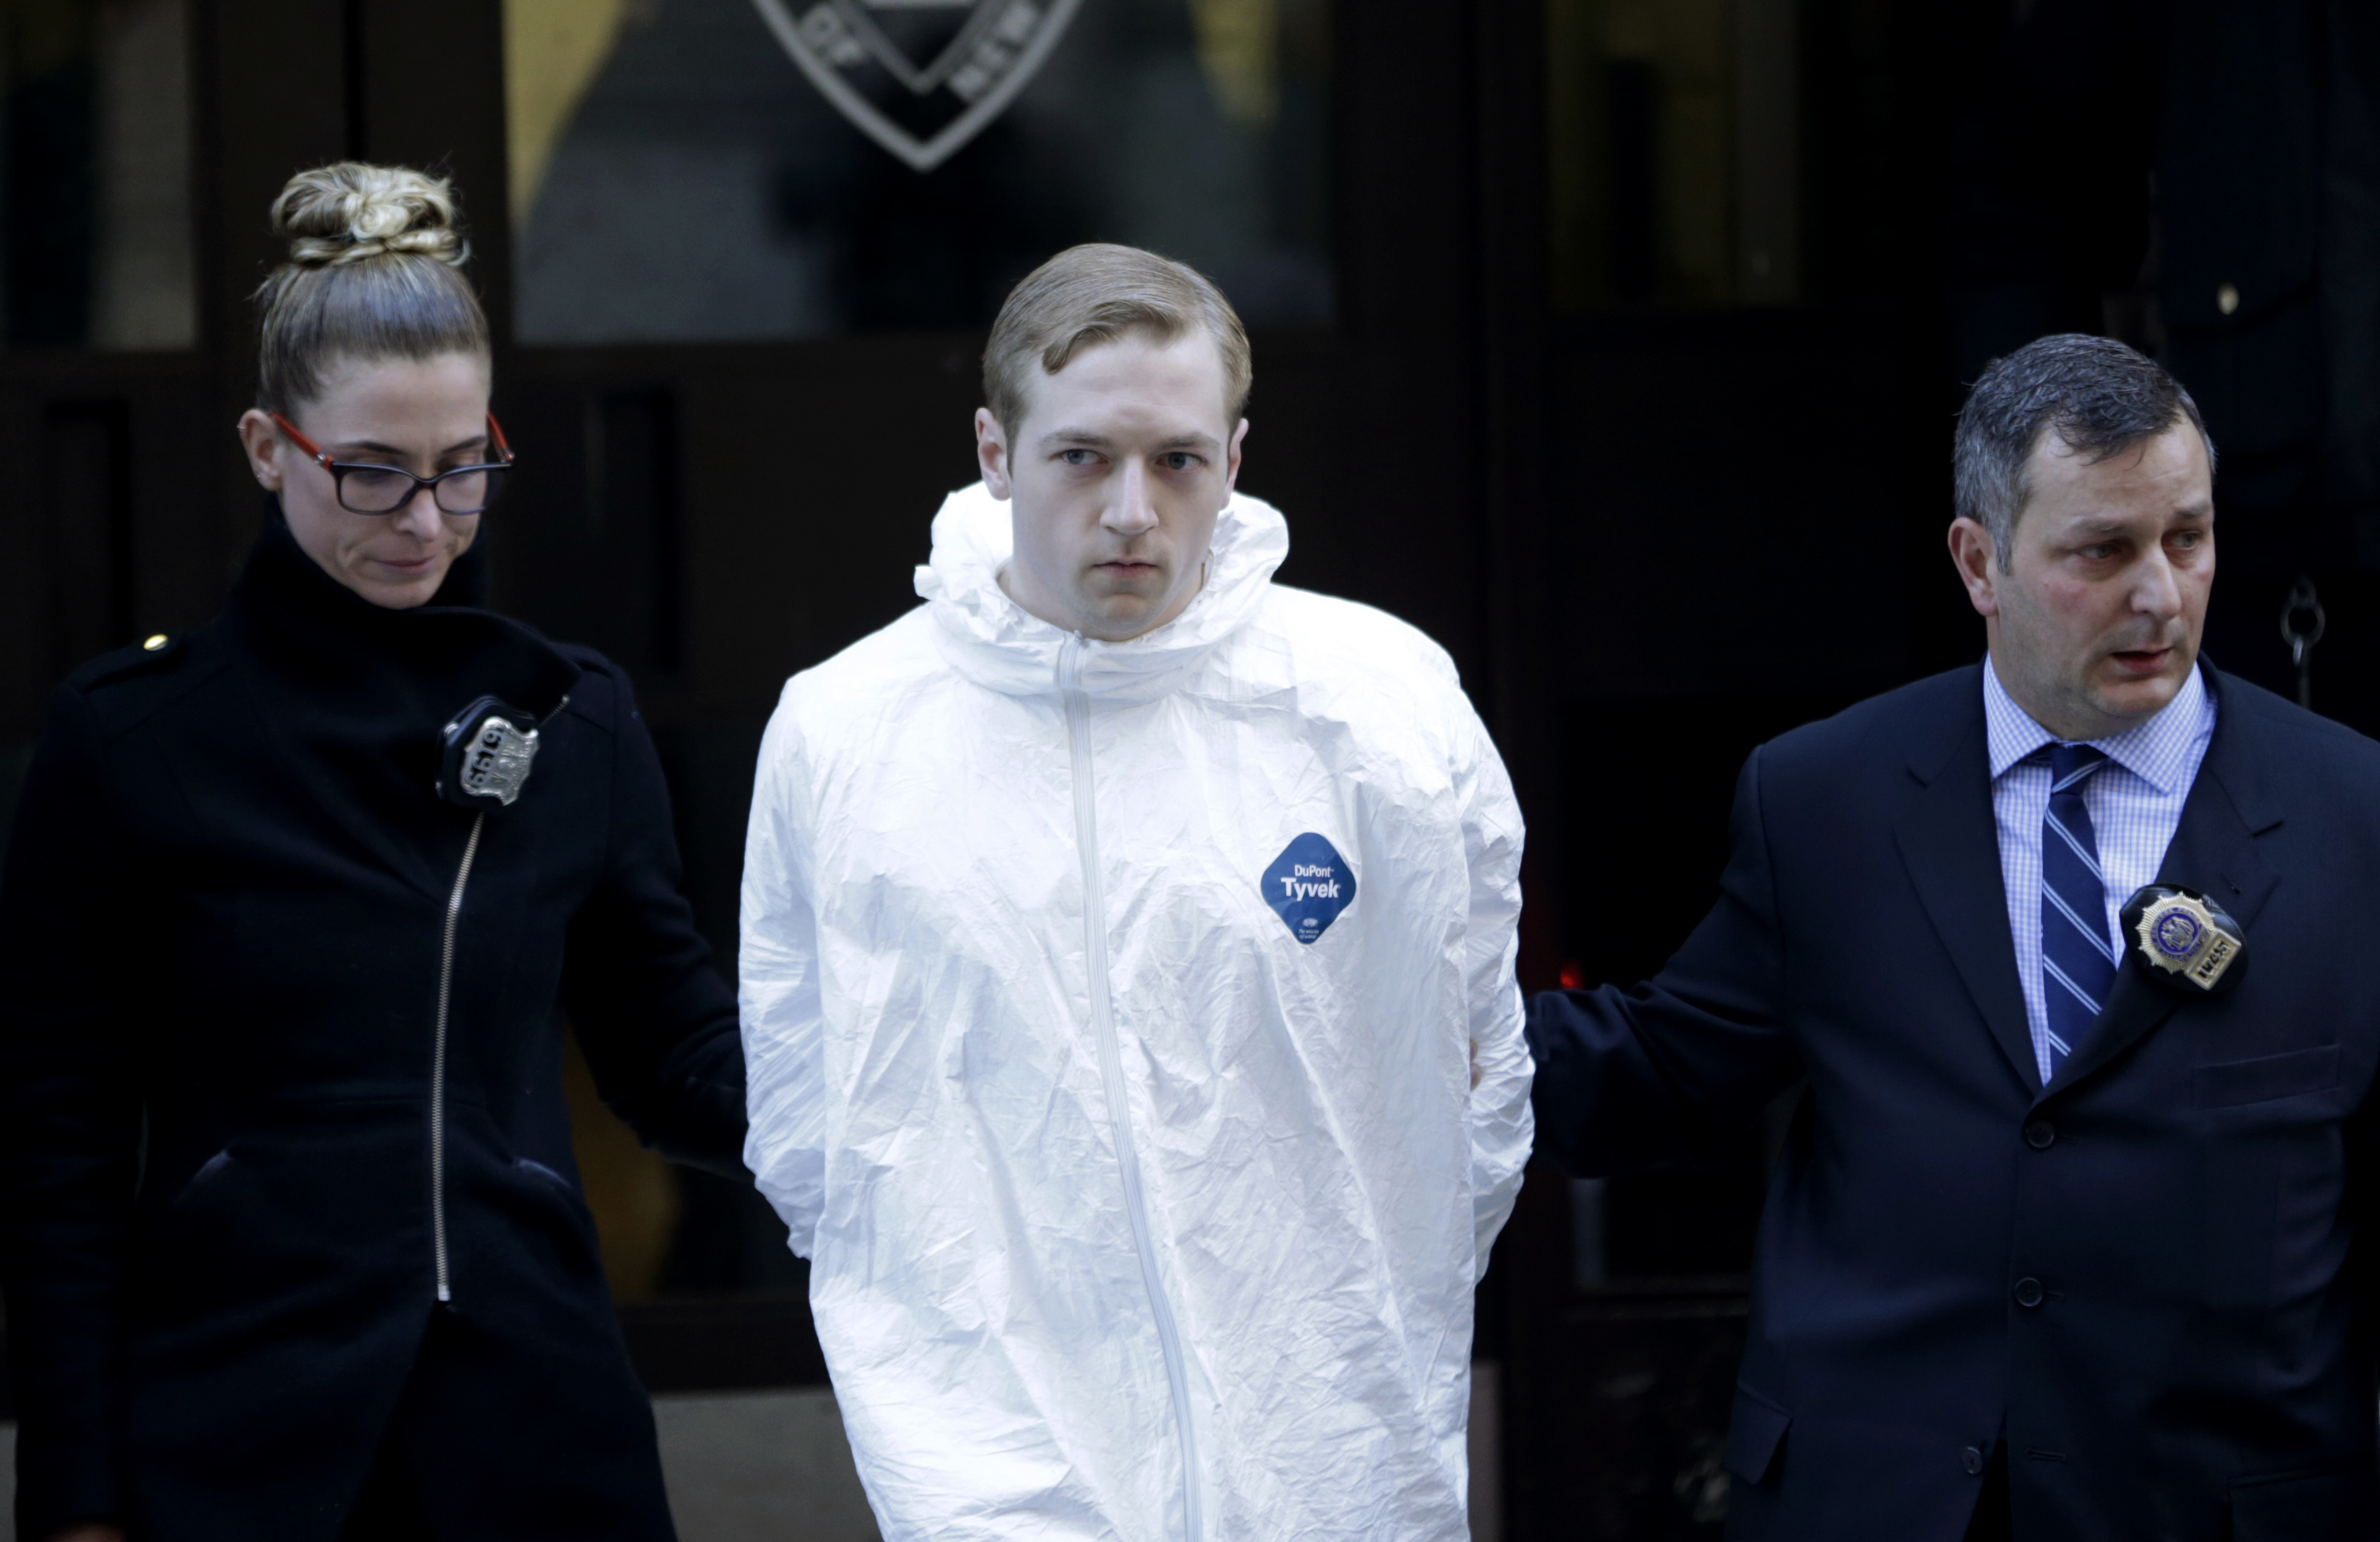 James Harris Jackson is escorted out of a police precinct in New York on March 22, 2017. Police said Jackson, accused of fatally stabbing a black man in New York City, told investigators he traveled from Baltimore specifically to attack black people. (Seth Wenig—AP)